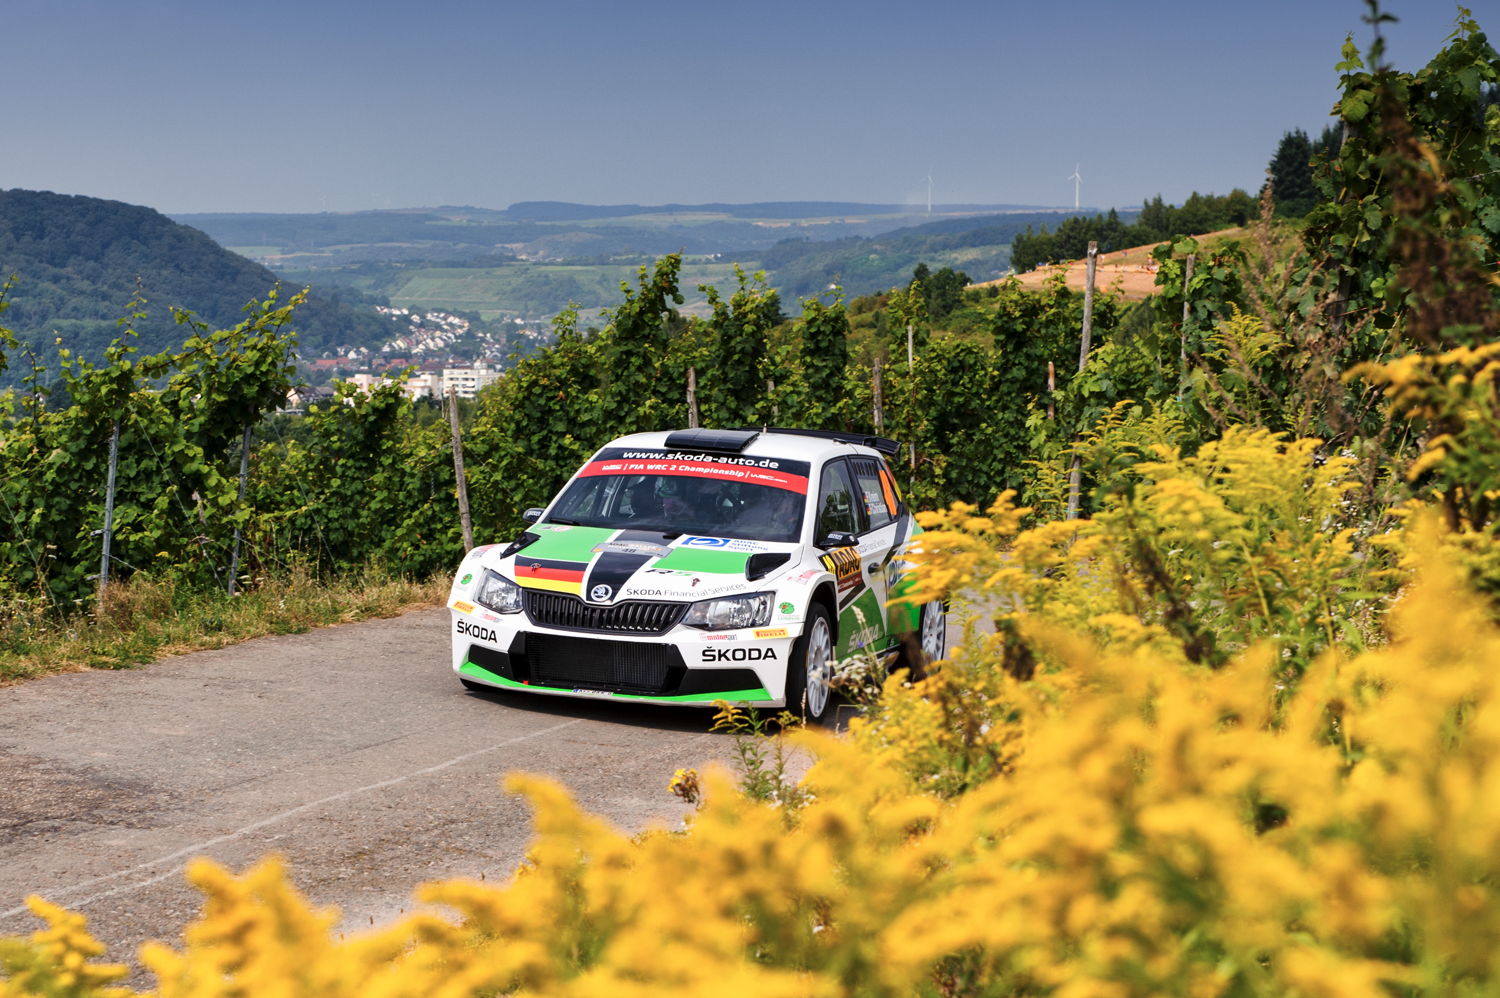 Fabian Kreim and Frank Christian (D/D) are making their second guest start in the Czech Rally Championship (MČR) at the Barum Czech Rally Zlín. They recently finished seventh at the Rally Bohemia.